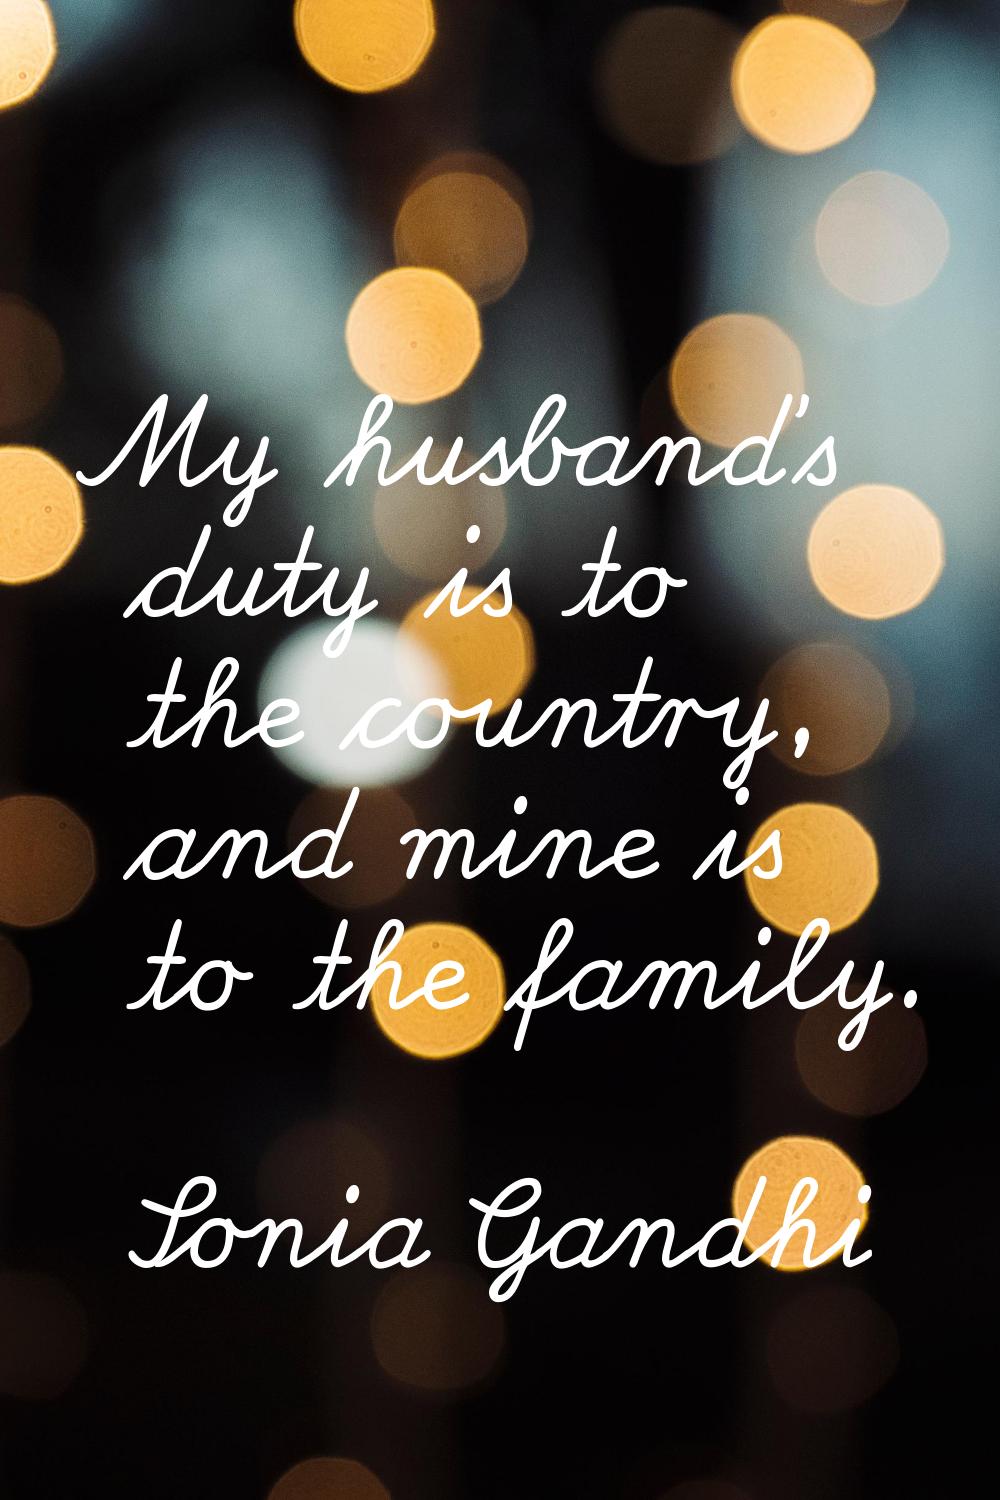 My husband's duty is to the country, and mine is to the family.